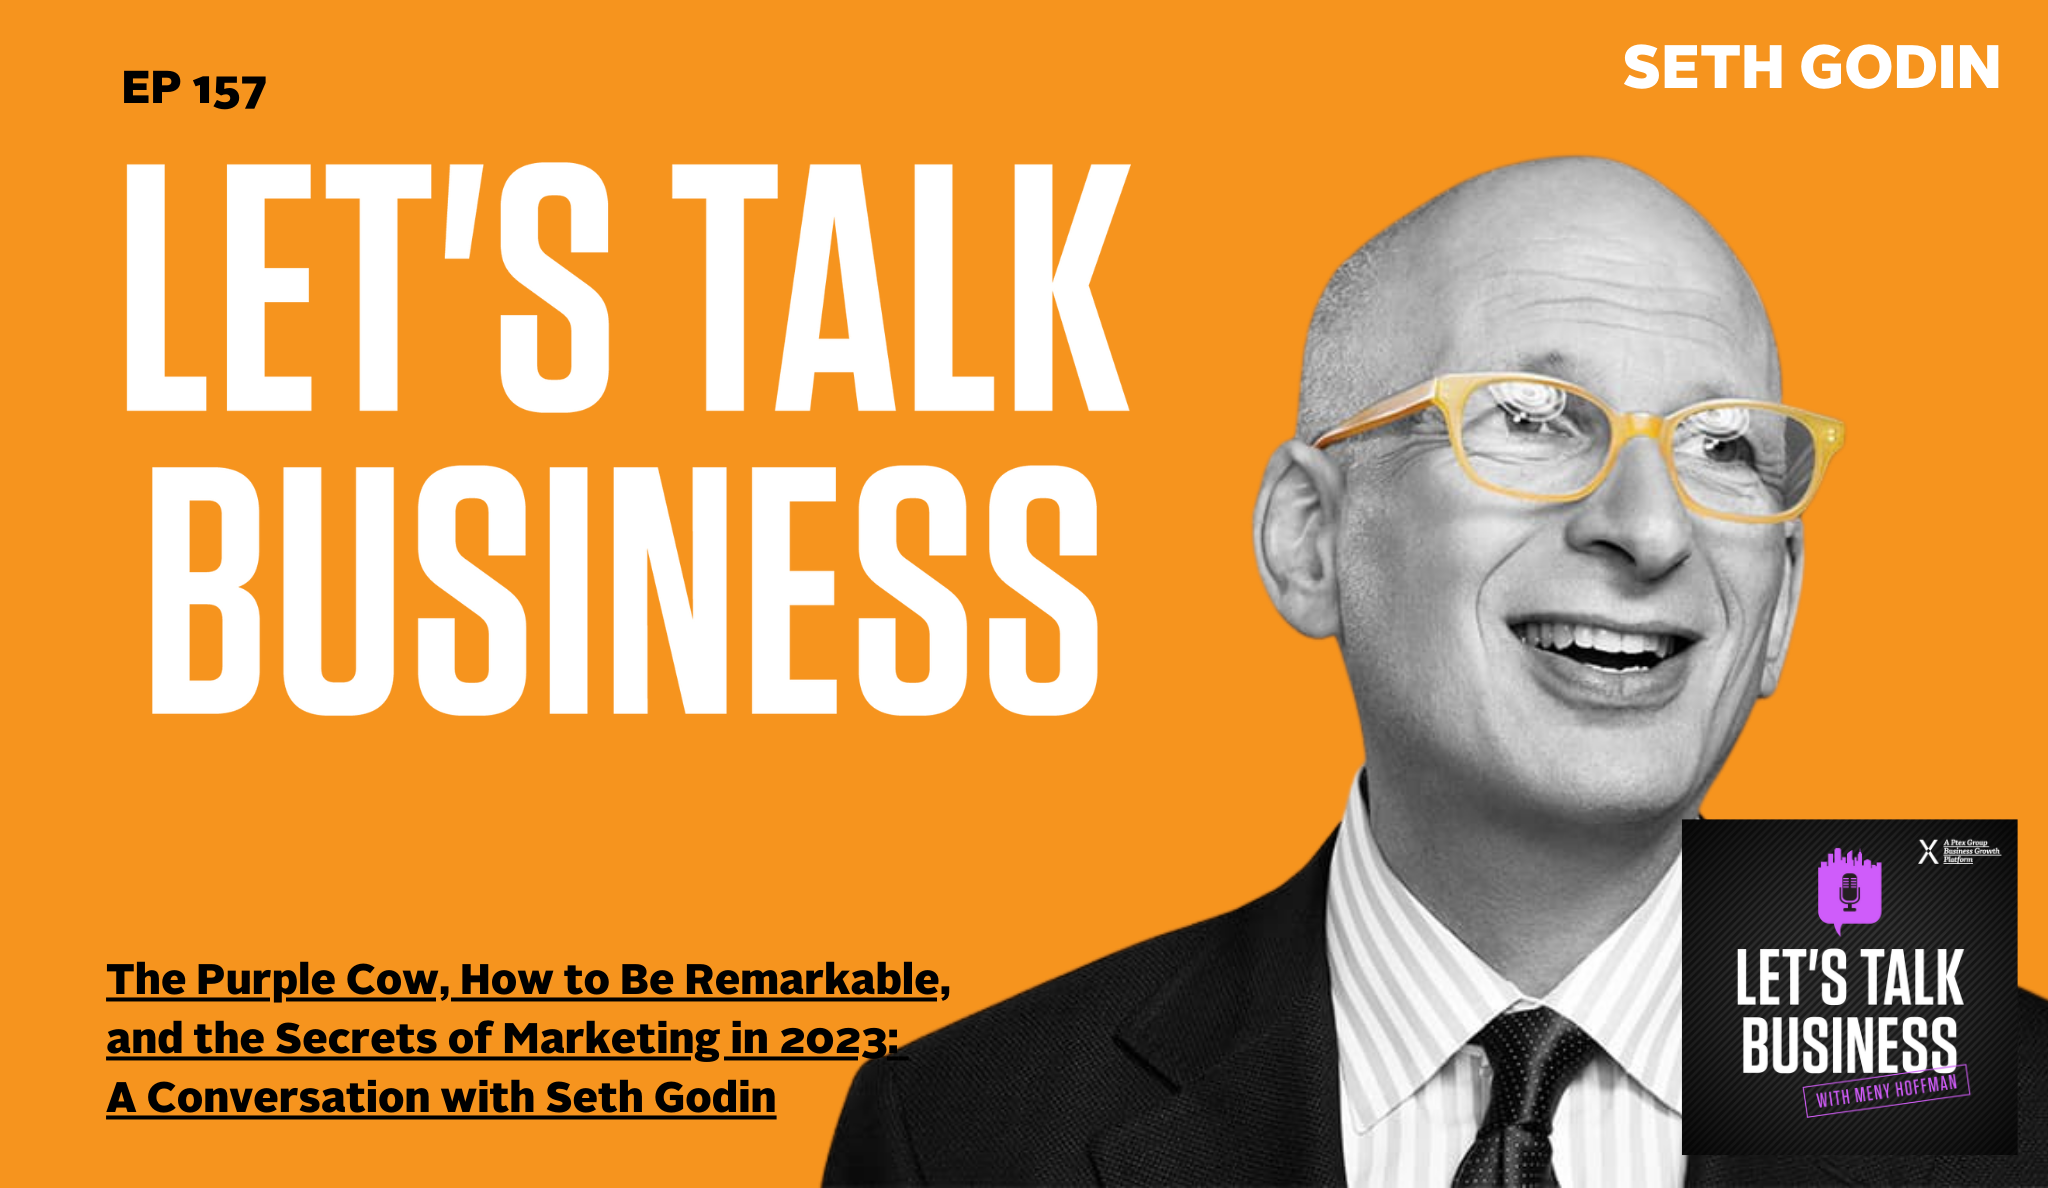 The Purple Cow, How to Be Remarkable, and the Secrets of Marketing in 2023: A Conversation with Seth Godin